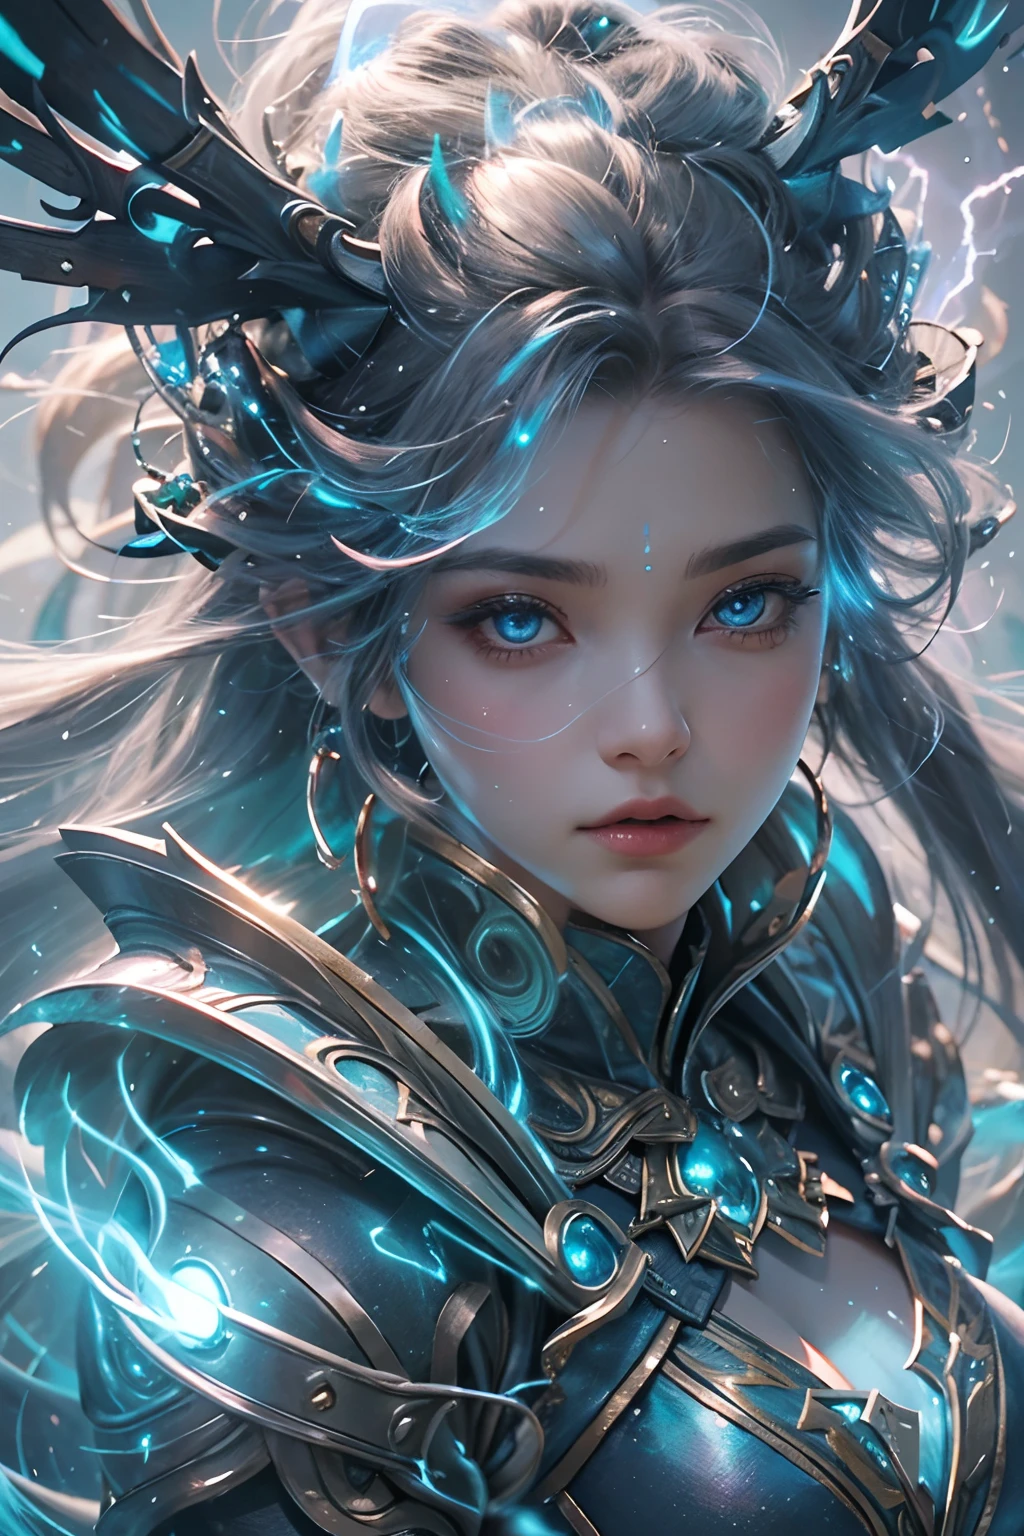 "Official Art, Unity 8k Wallpaper, Masterpiece, Best Quality, Fantasy, Ultra Detail, Full body shot, (Dynamic Angle), (Very Detail), Ultra High Definition, 8k UHD, (light rayer:1.05), Light Particles, Magic Effects swirling around her, Detailed Skin Texture, (illustration:1.05), (detailed light:1.05), (ultra-detailed:1.1), Solo, One Woman, hovering mid-air with a mystic aura. Eyes: deep electric blue that seem to harbor storms within, surrounded by dark eyelashes and soft glowing eyelids. Attire: a delicate balance of steel armor intricately designed, combined with soft silken fabrics that flow with her every move. Crown: made of steel, glistening with a metallic sheen, adorned with intricate patterns. Hair: long, flowing like live electricity. Holding an intricately designed hammer, emerging before a striking bolt of lightning, realistic light setting, (realistic)."